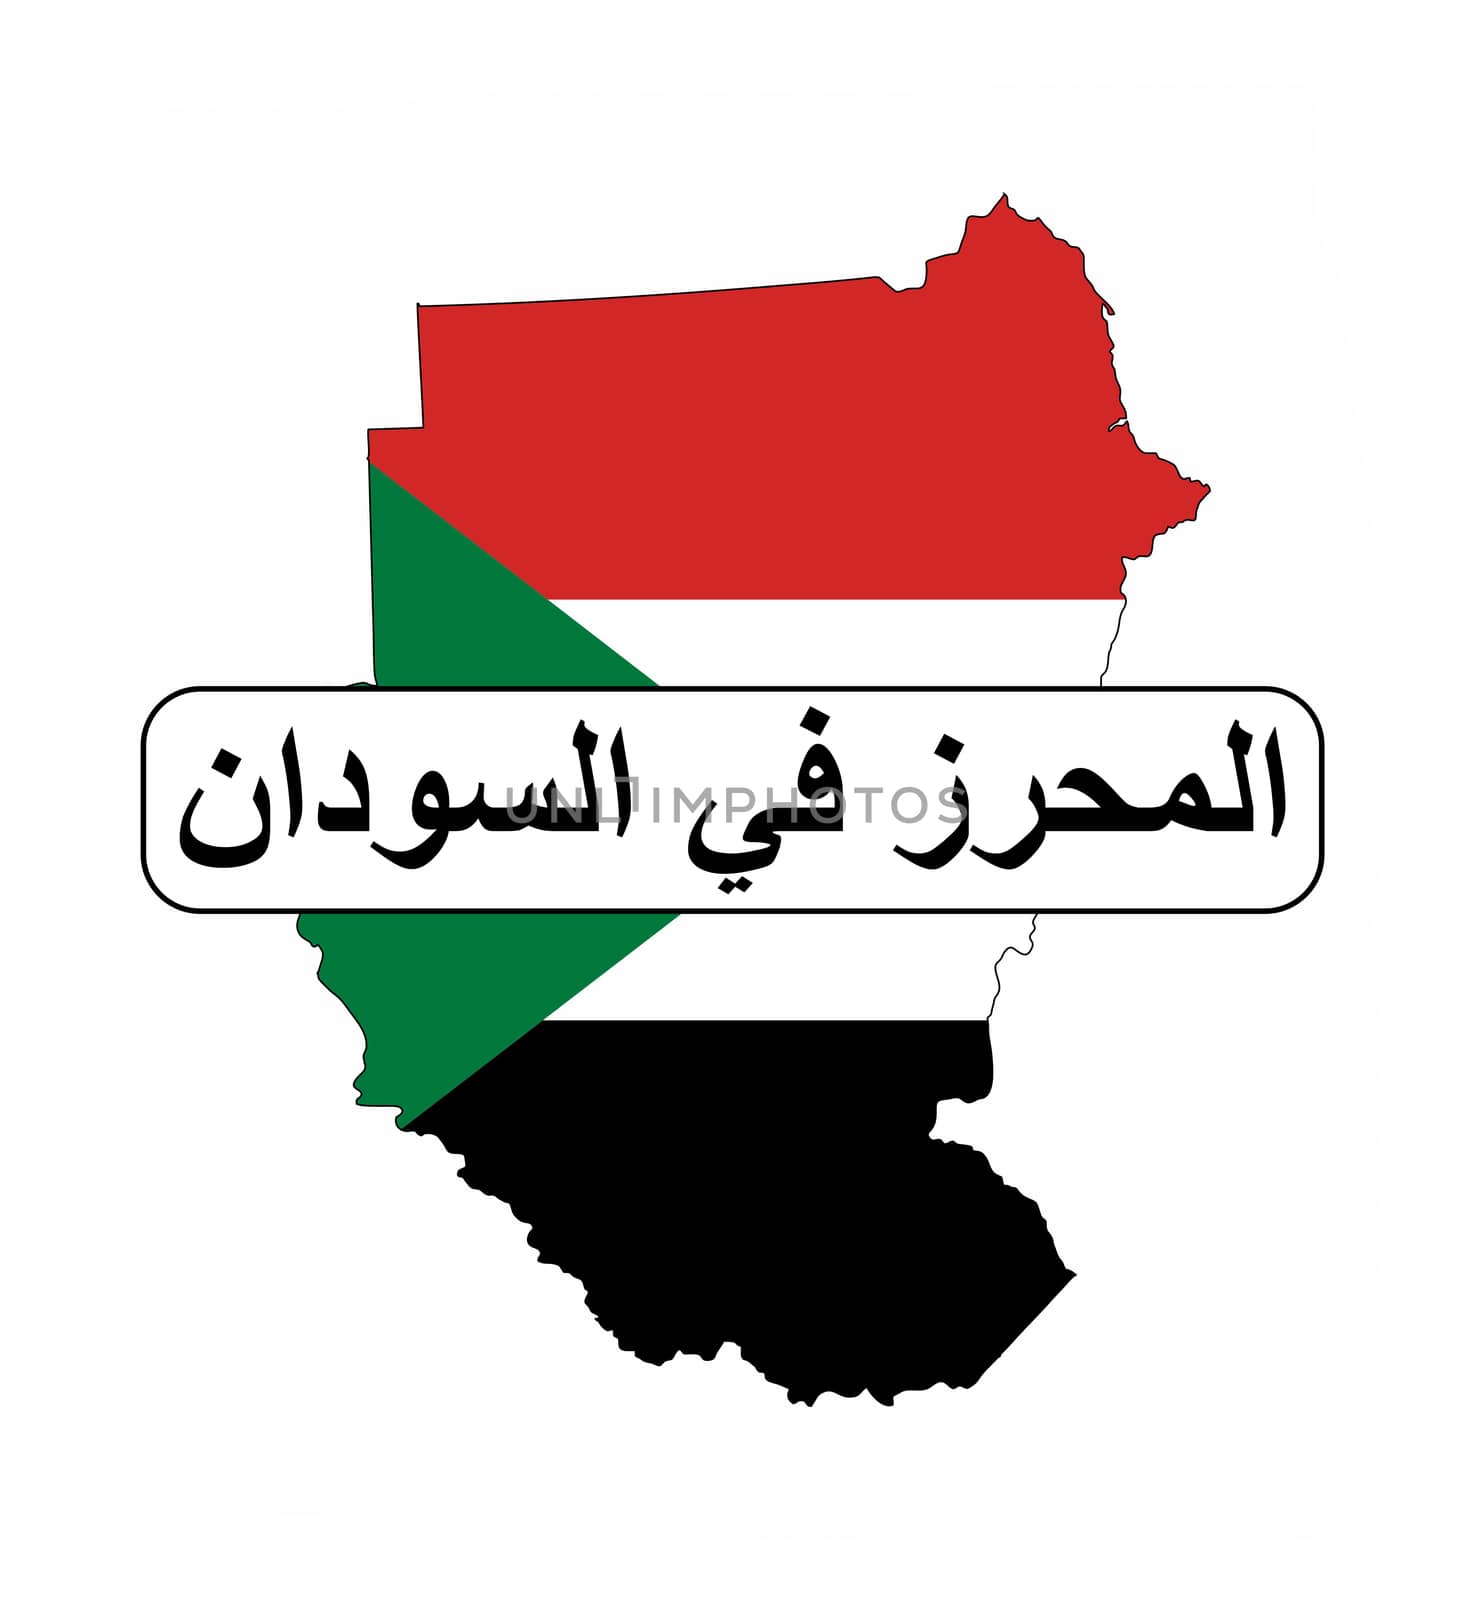 made in sudan country national flag map shape with text